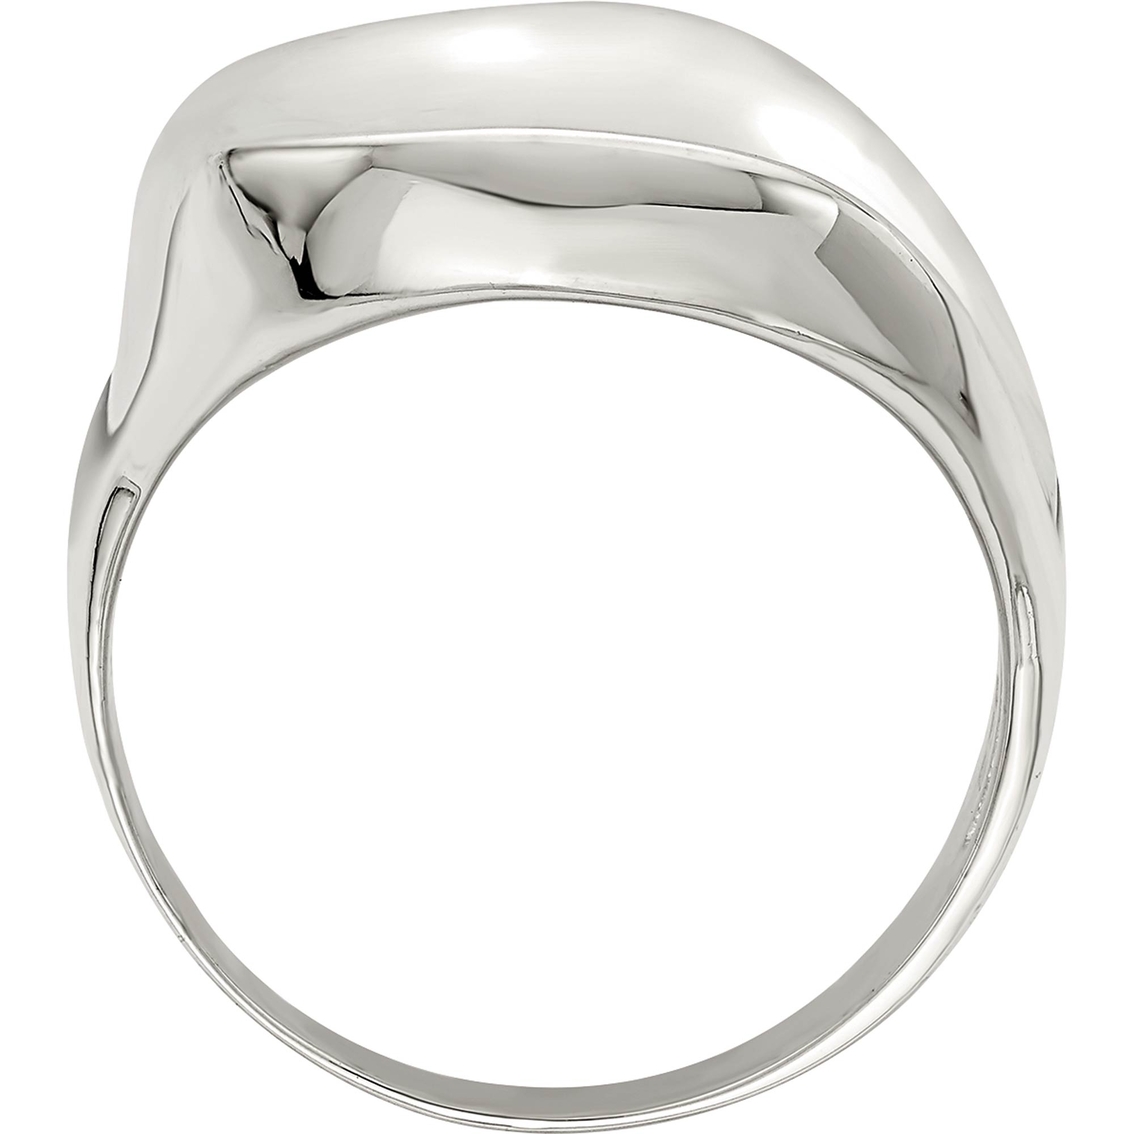 Sterling Silver Solid Ring - Image 2 of 5